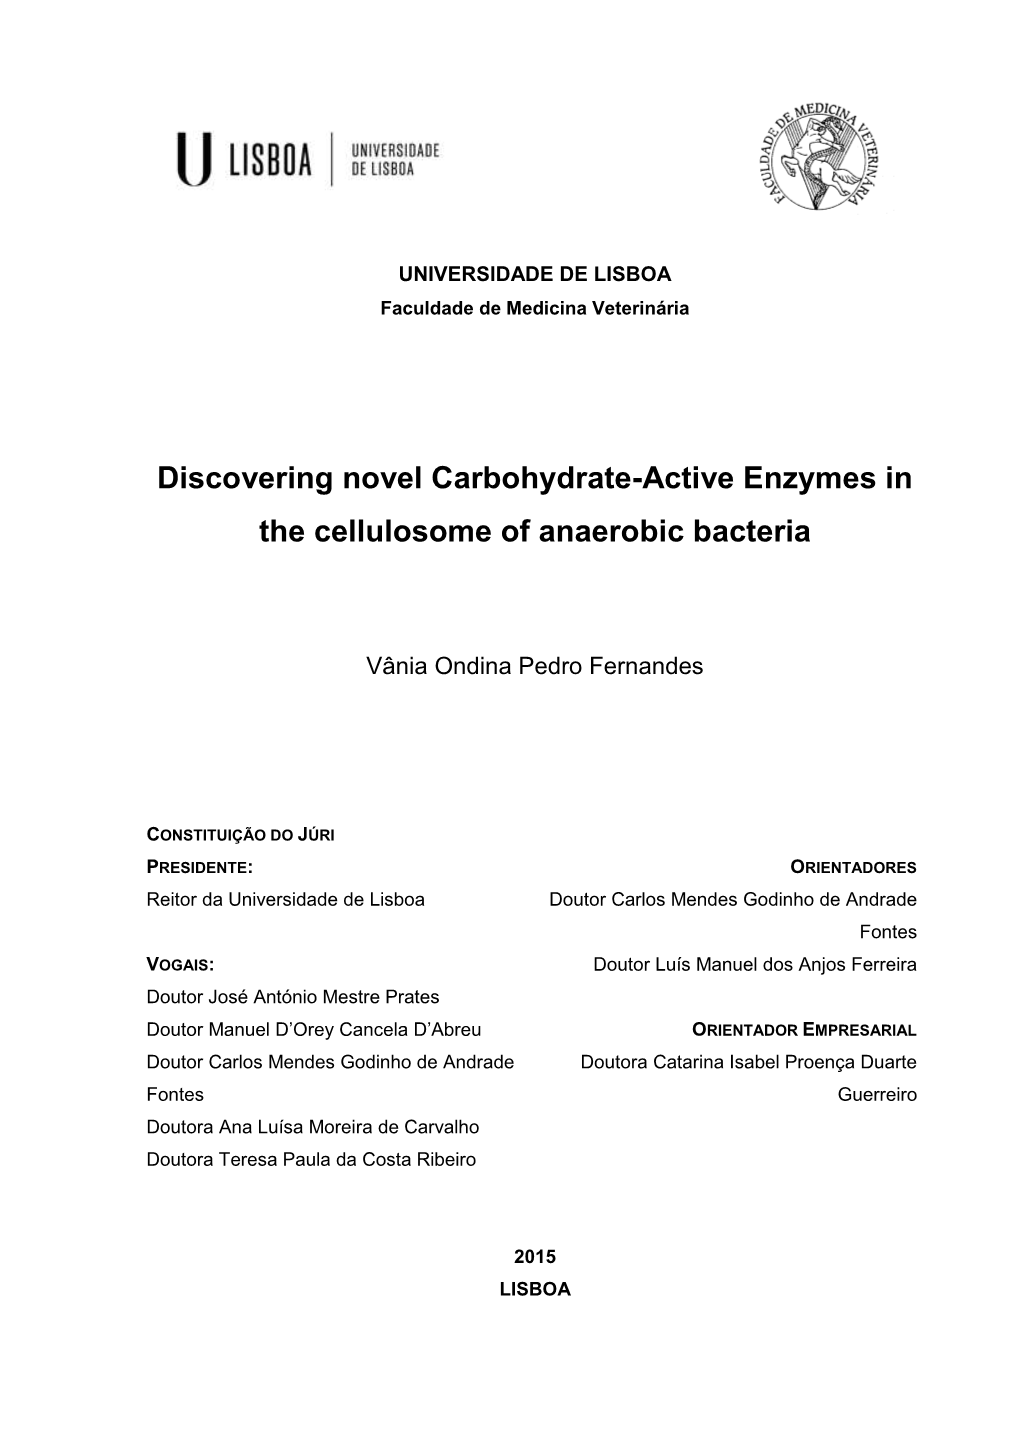 Discovering Novel Carbohydrate-Active Enzymes in the Cellulosome of Anaerobic Bacteria